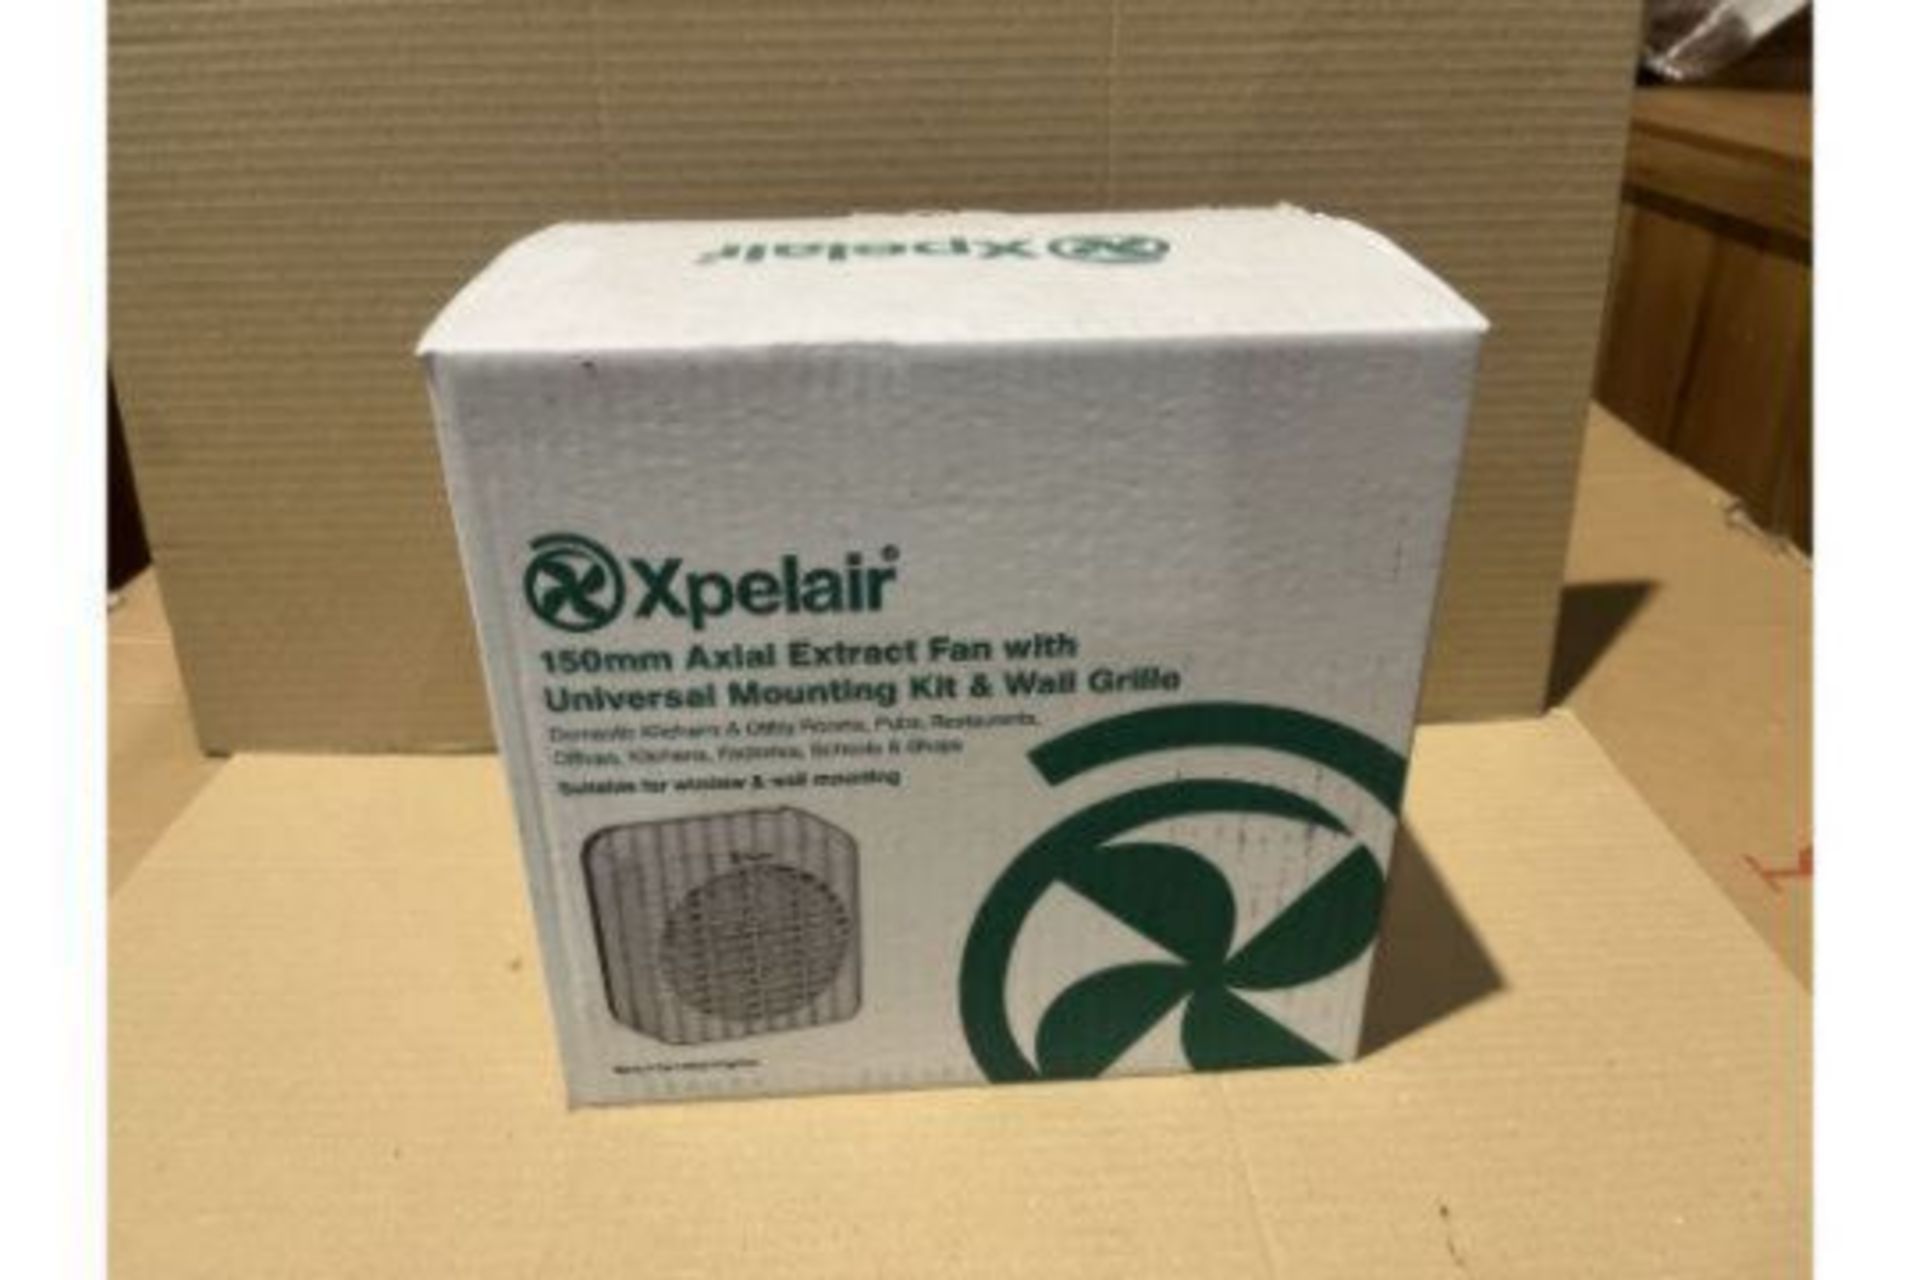 2 X BRAND NEW XPELAIR 150MM AXIAL EXTRACT FAN WITH UNIVERSAL MOUNTING KIT AND WALL GRILL R11-1